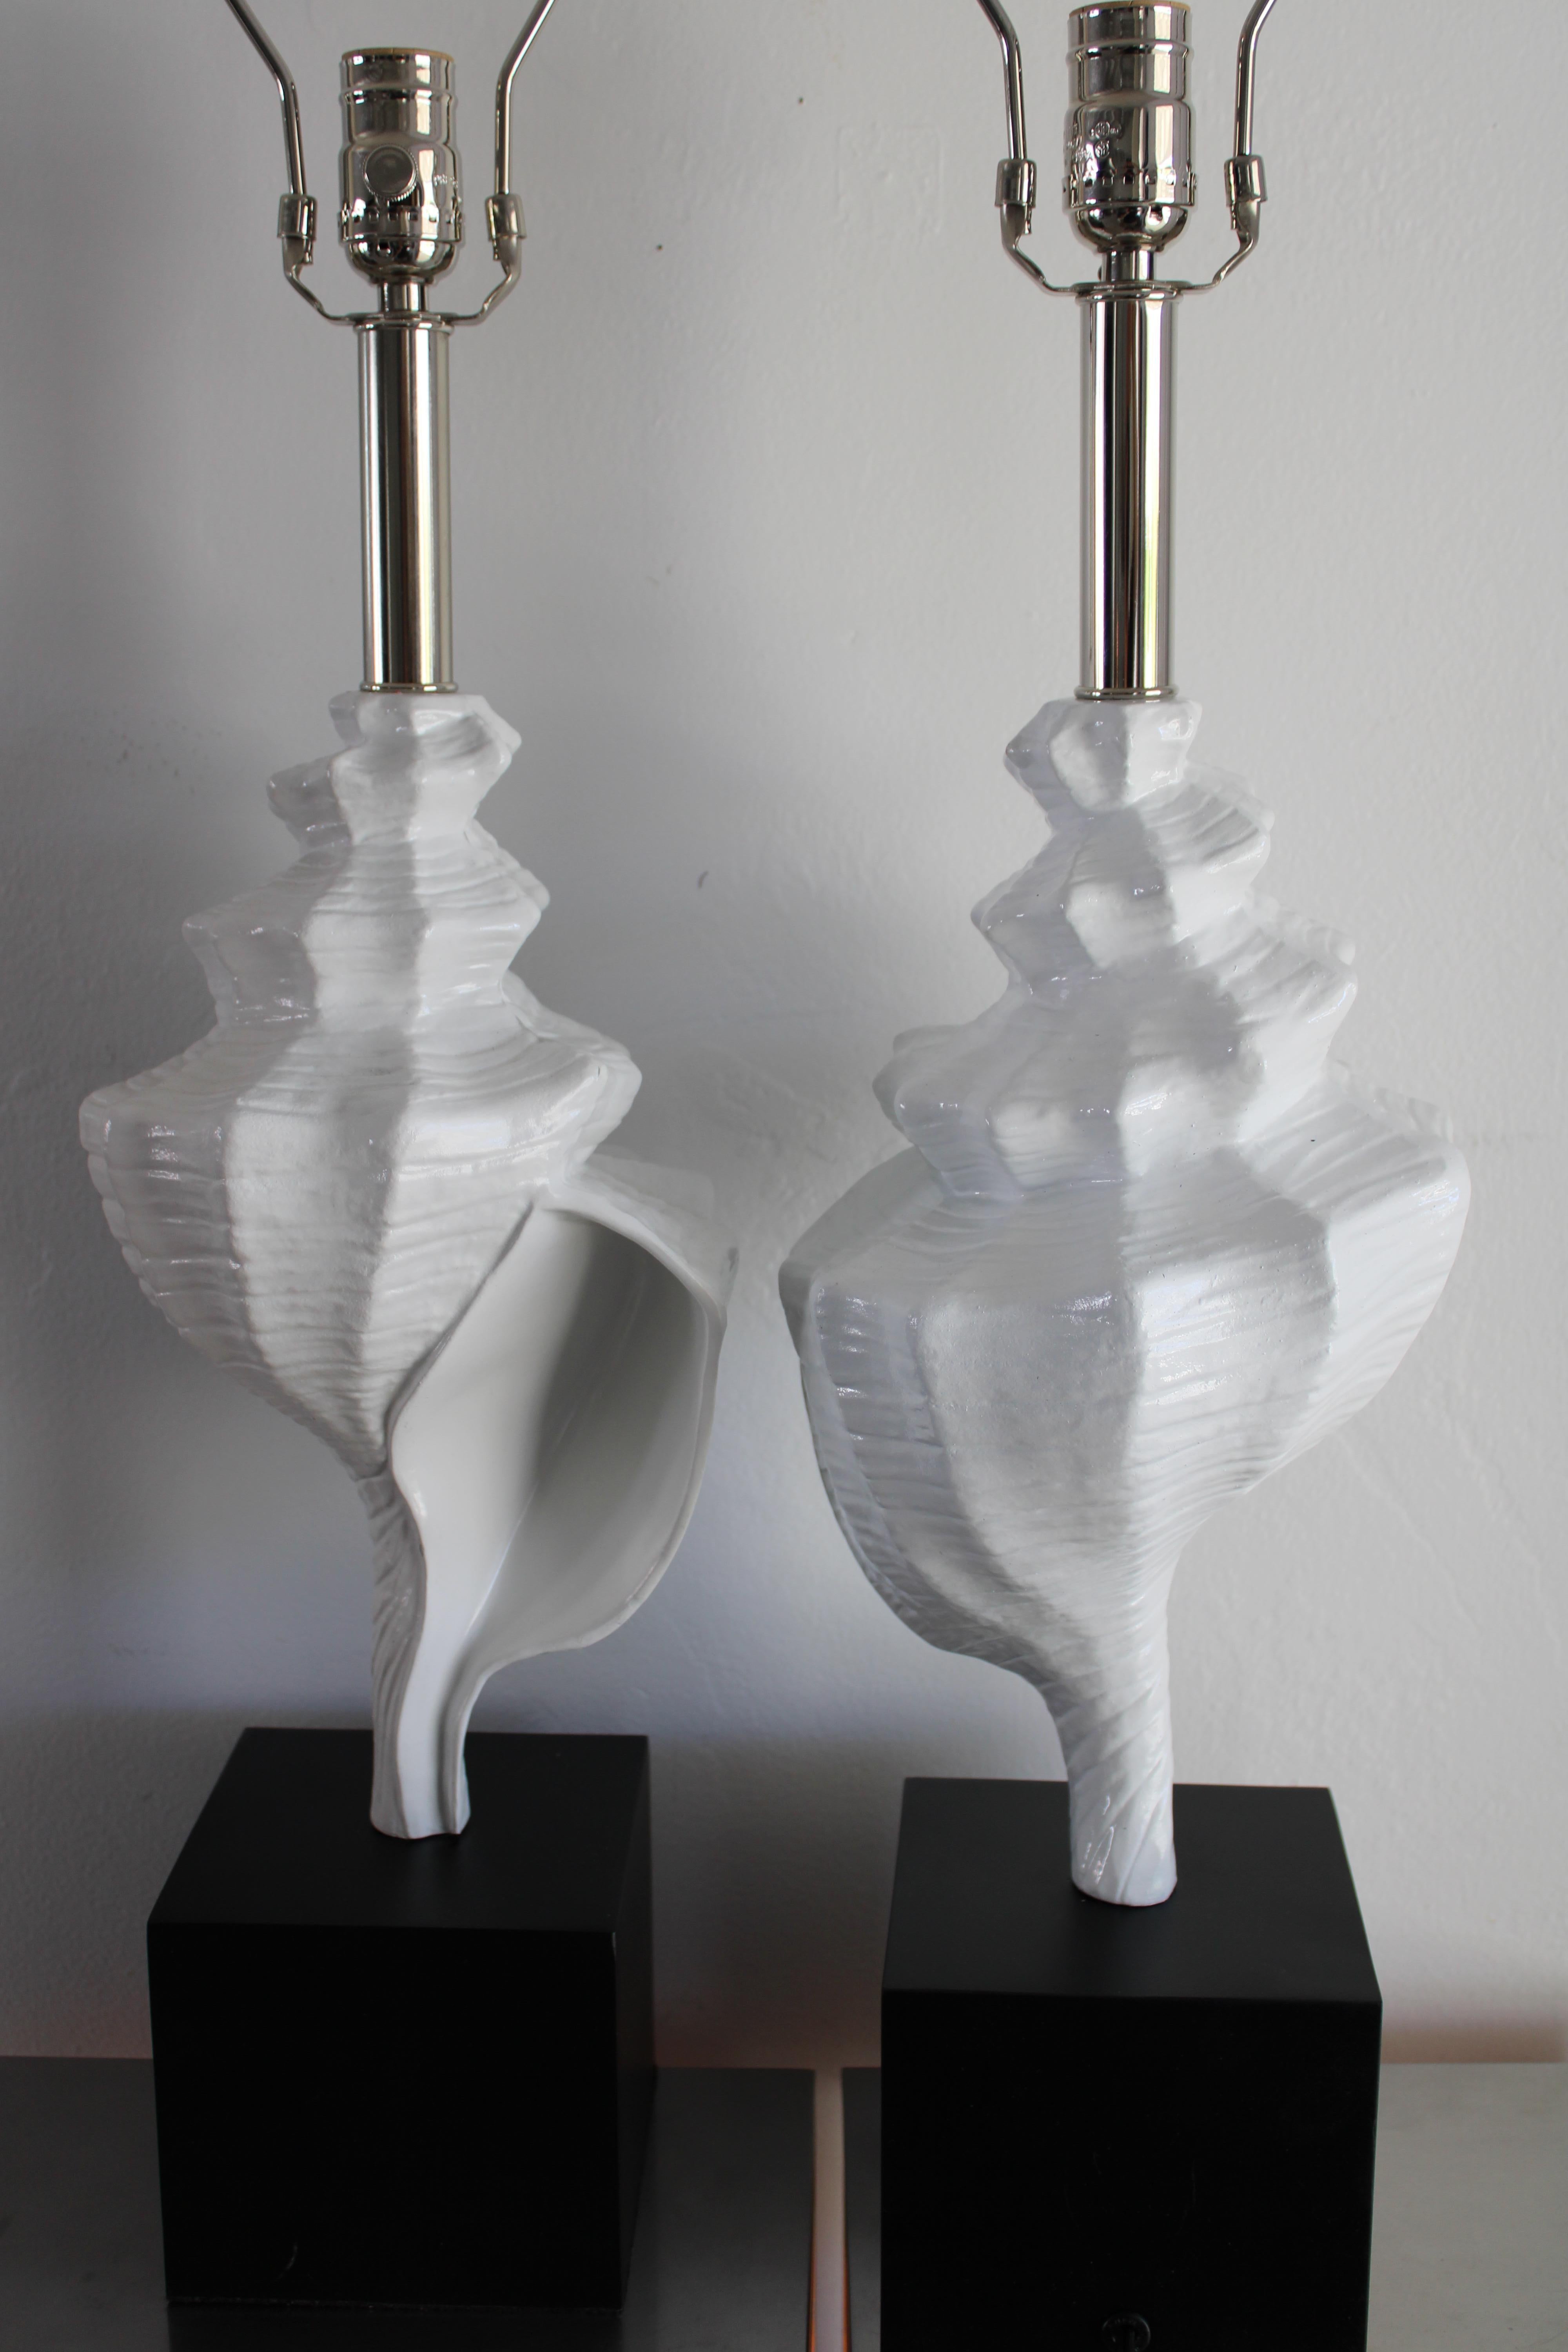 American Pair of Aluminum Seashell Lamps Attributed to the Laurel Lamp Co.